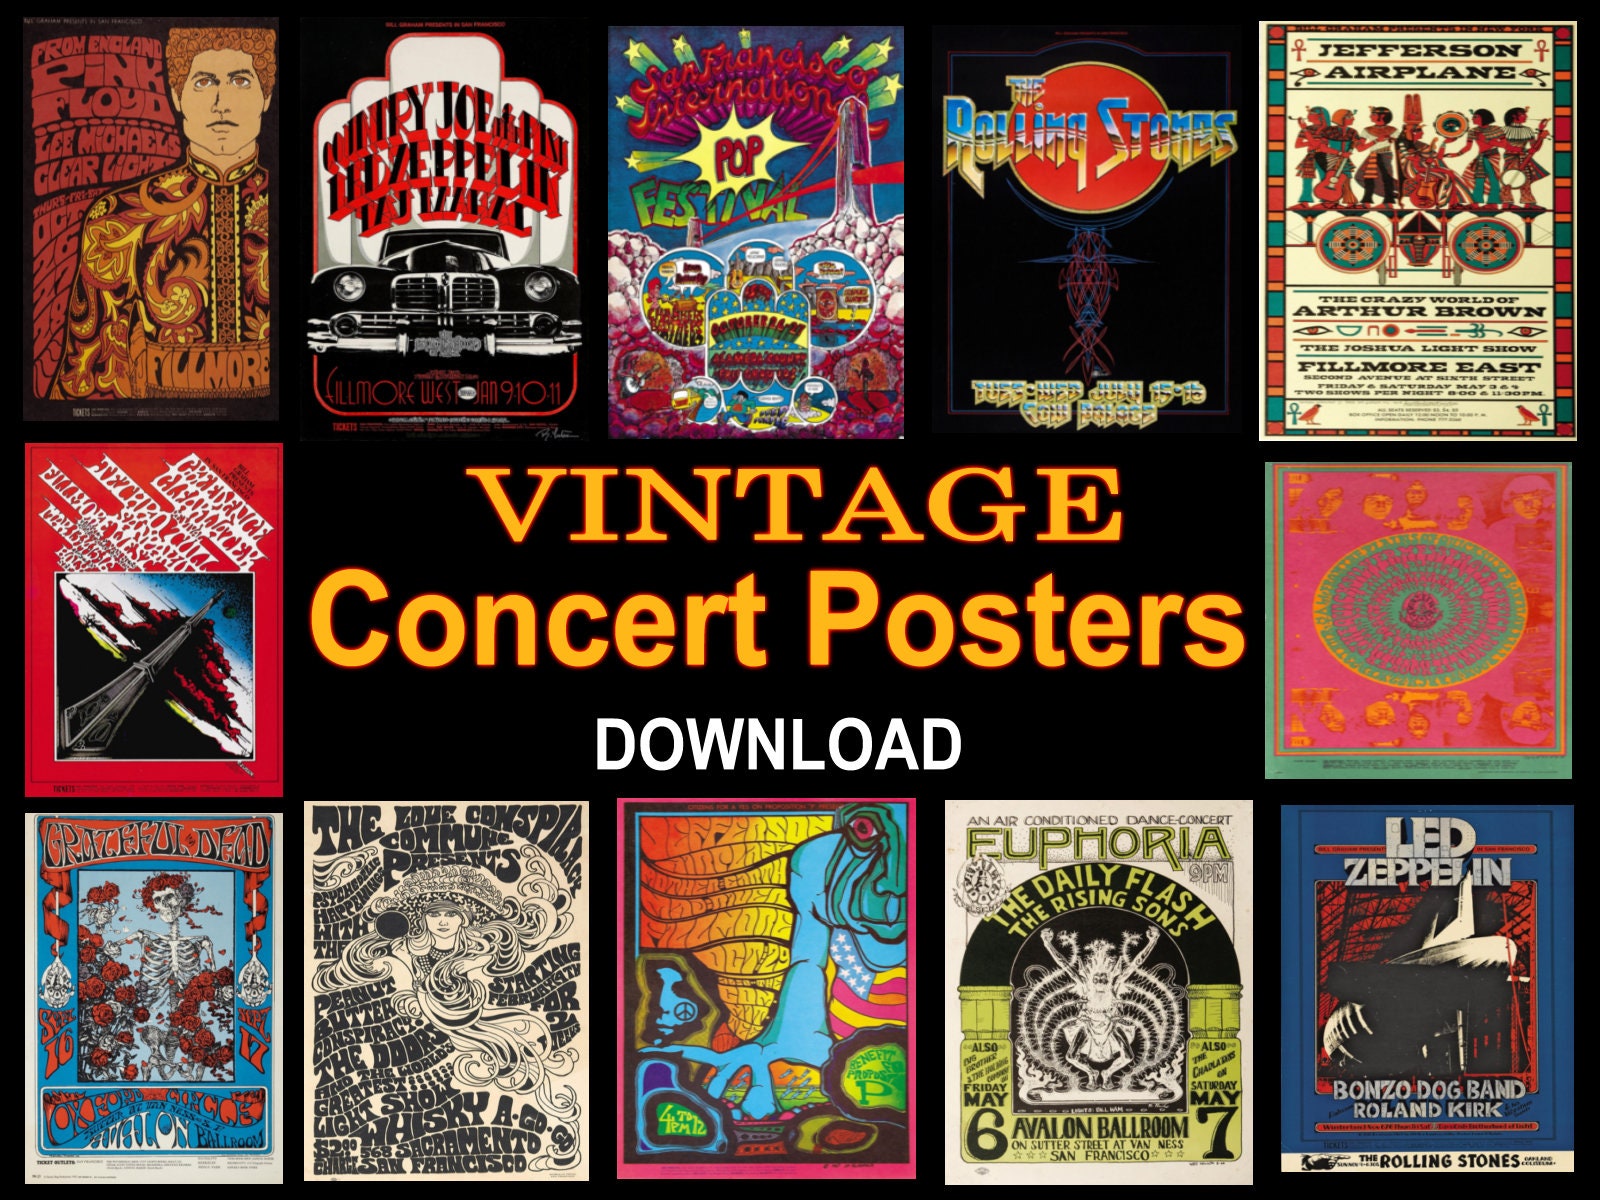 1970s rock posters